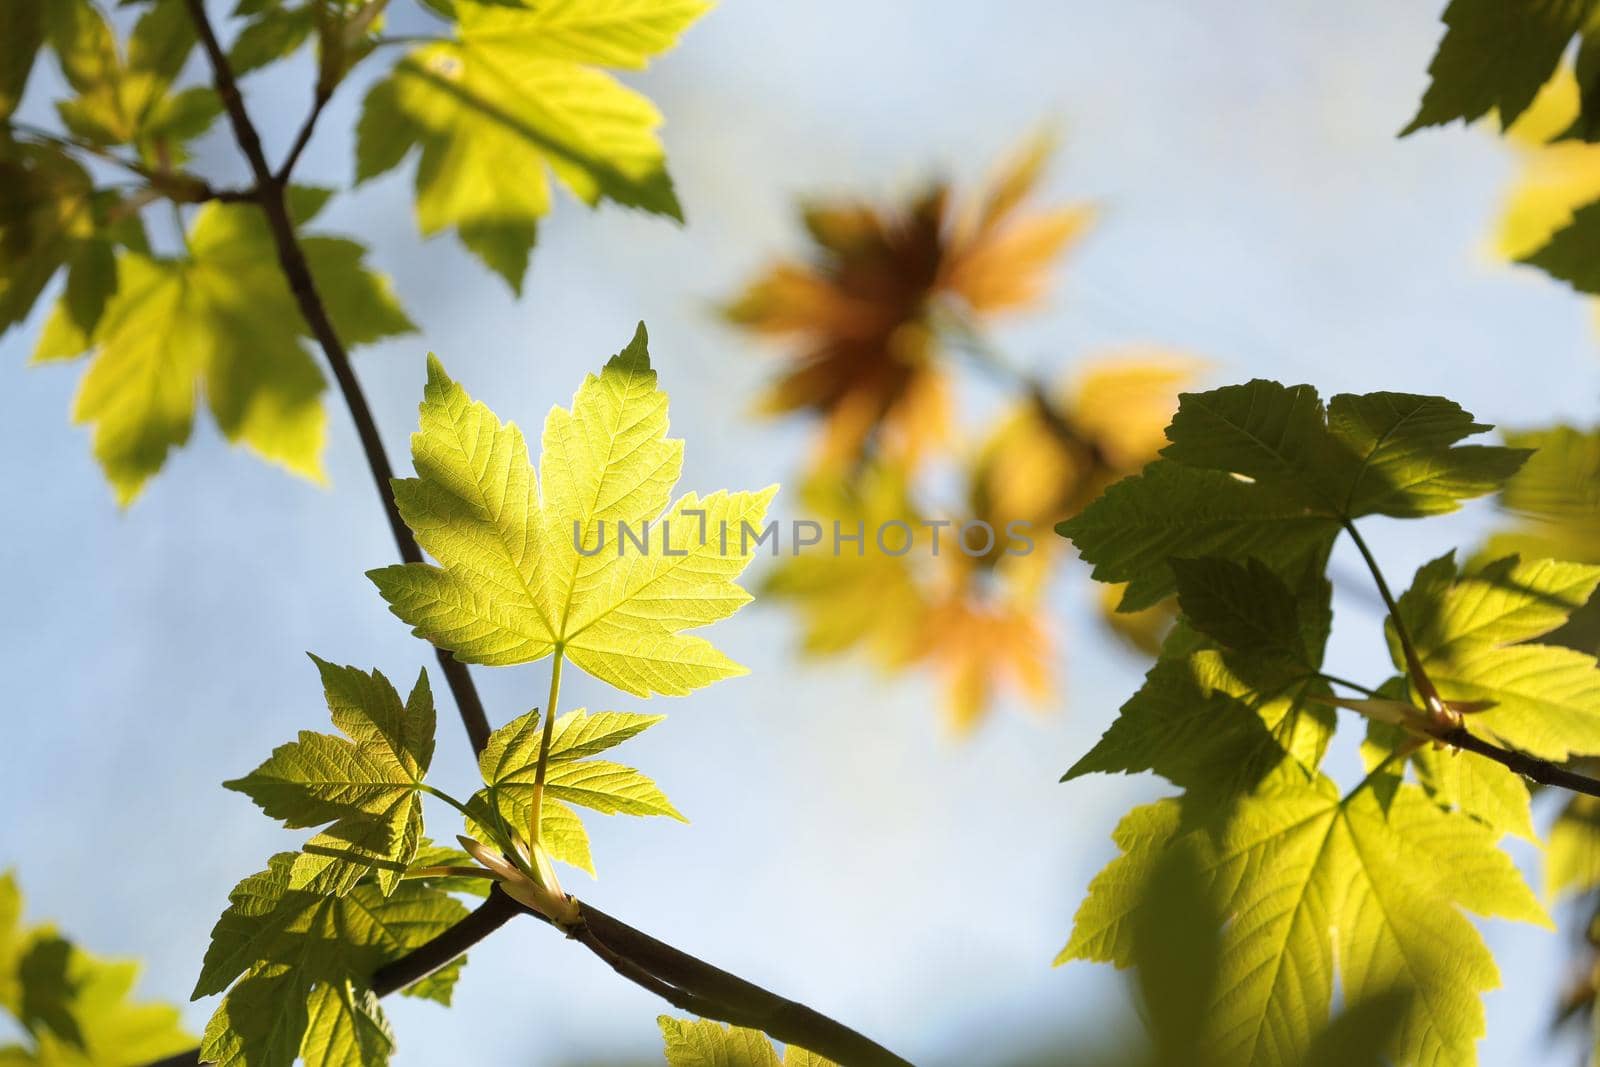 Sycamore maple leaves by nature78